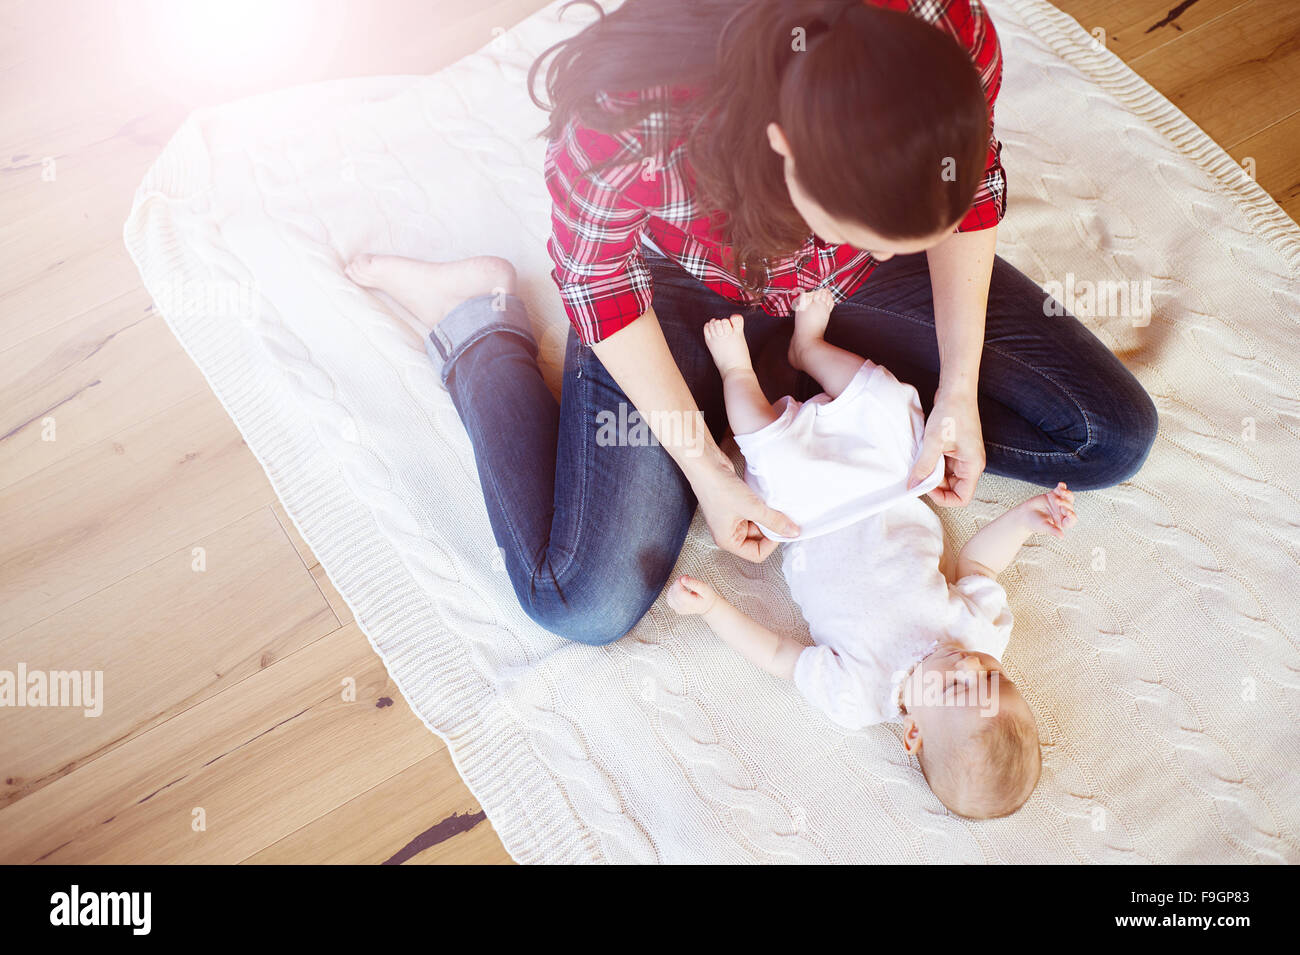 https://c8.alamy.com/comp/F9GP83/cute-little-baby-girl-getting-dressed-by-her-mother-on-a-carpet-in-F9GP83.jpg